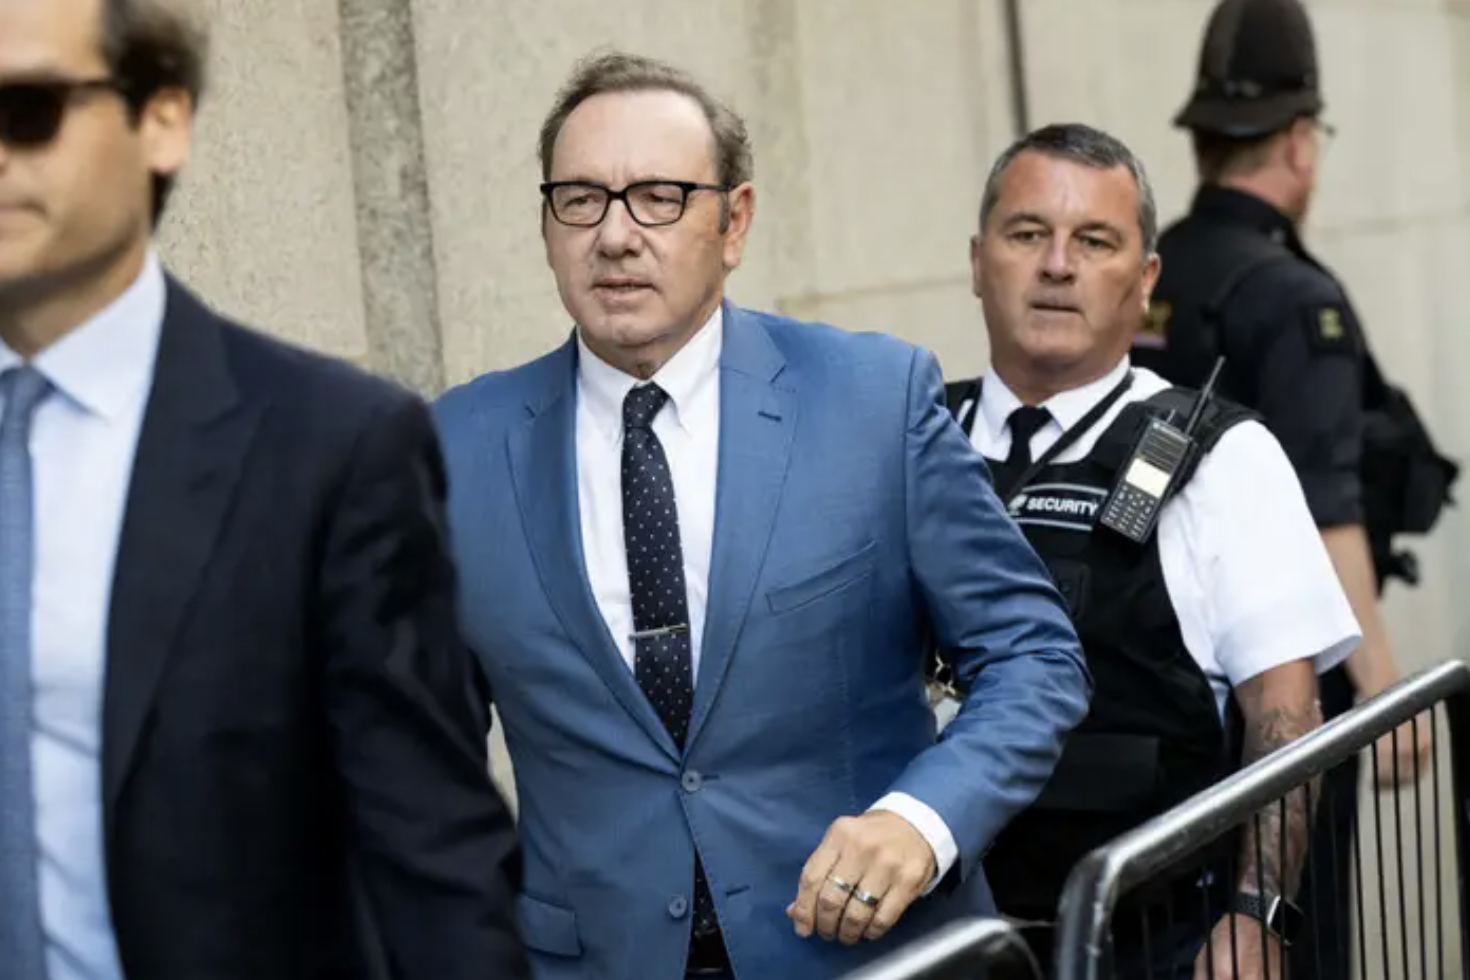 Kevin Spacey in a suit walking with security outside a courthouse